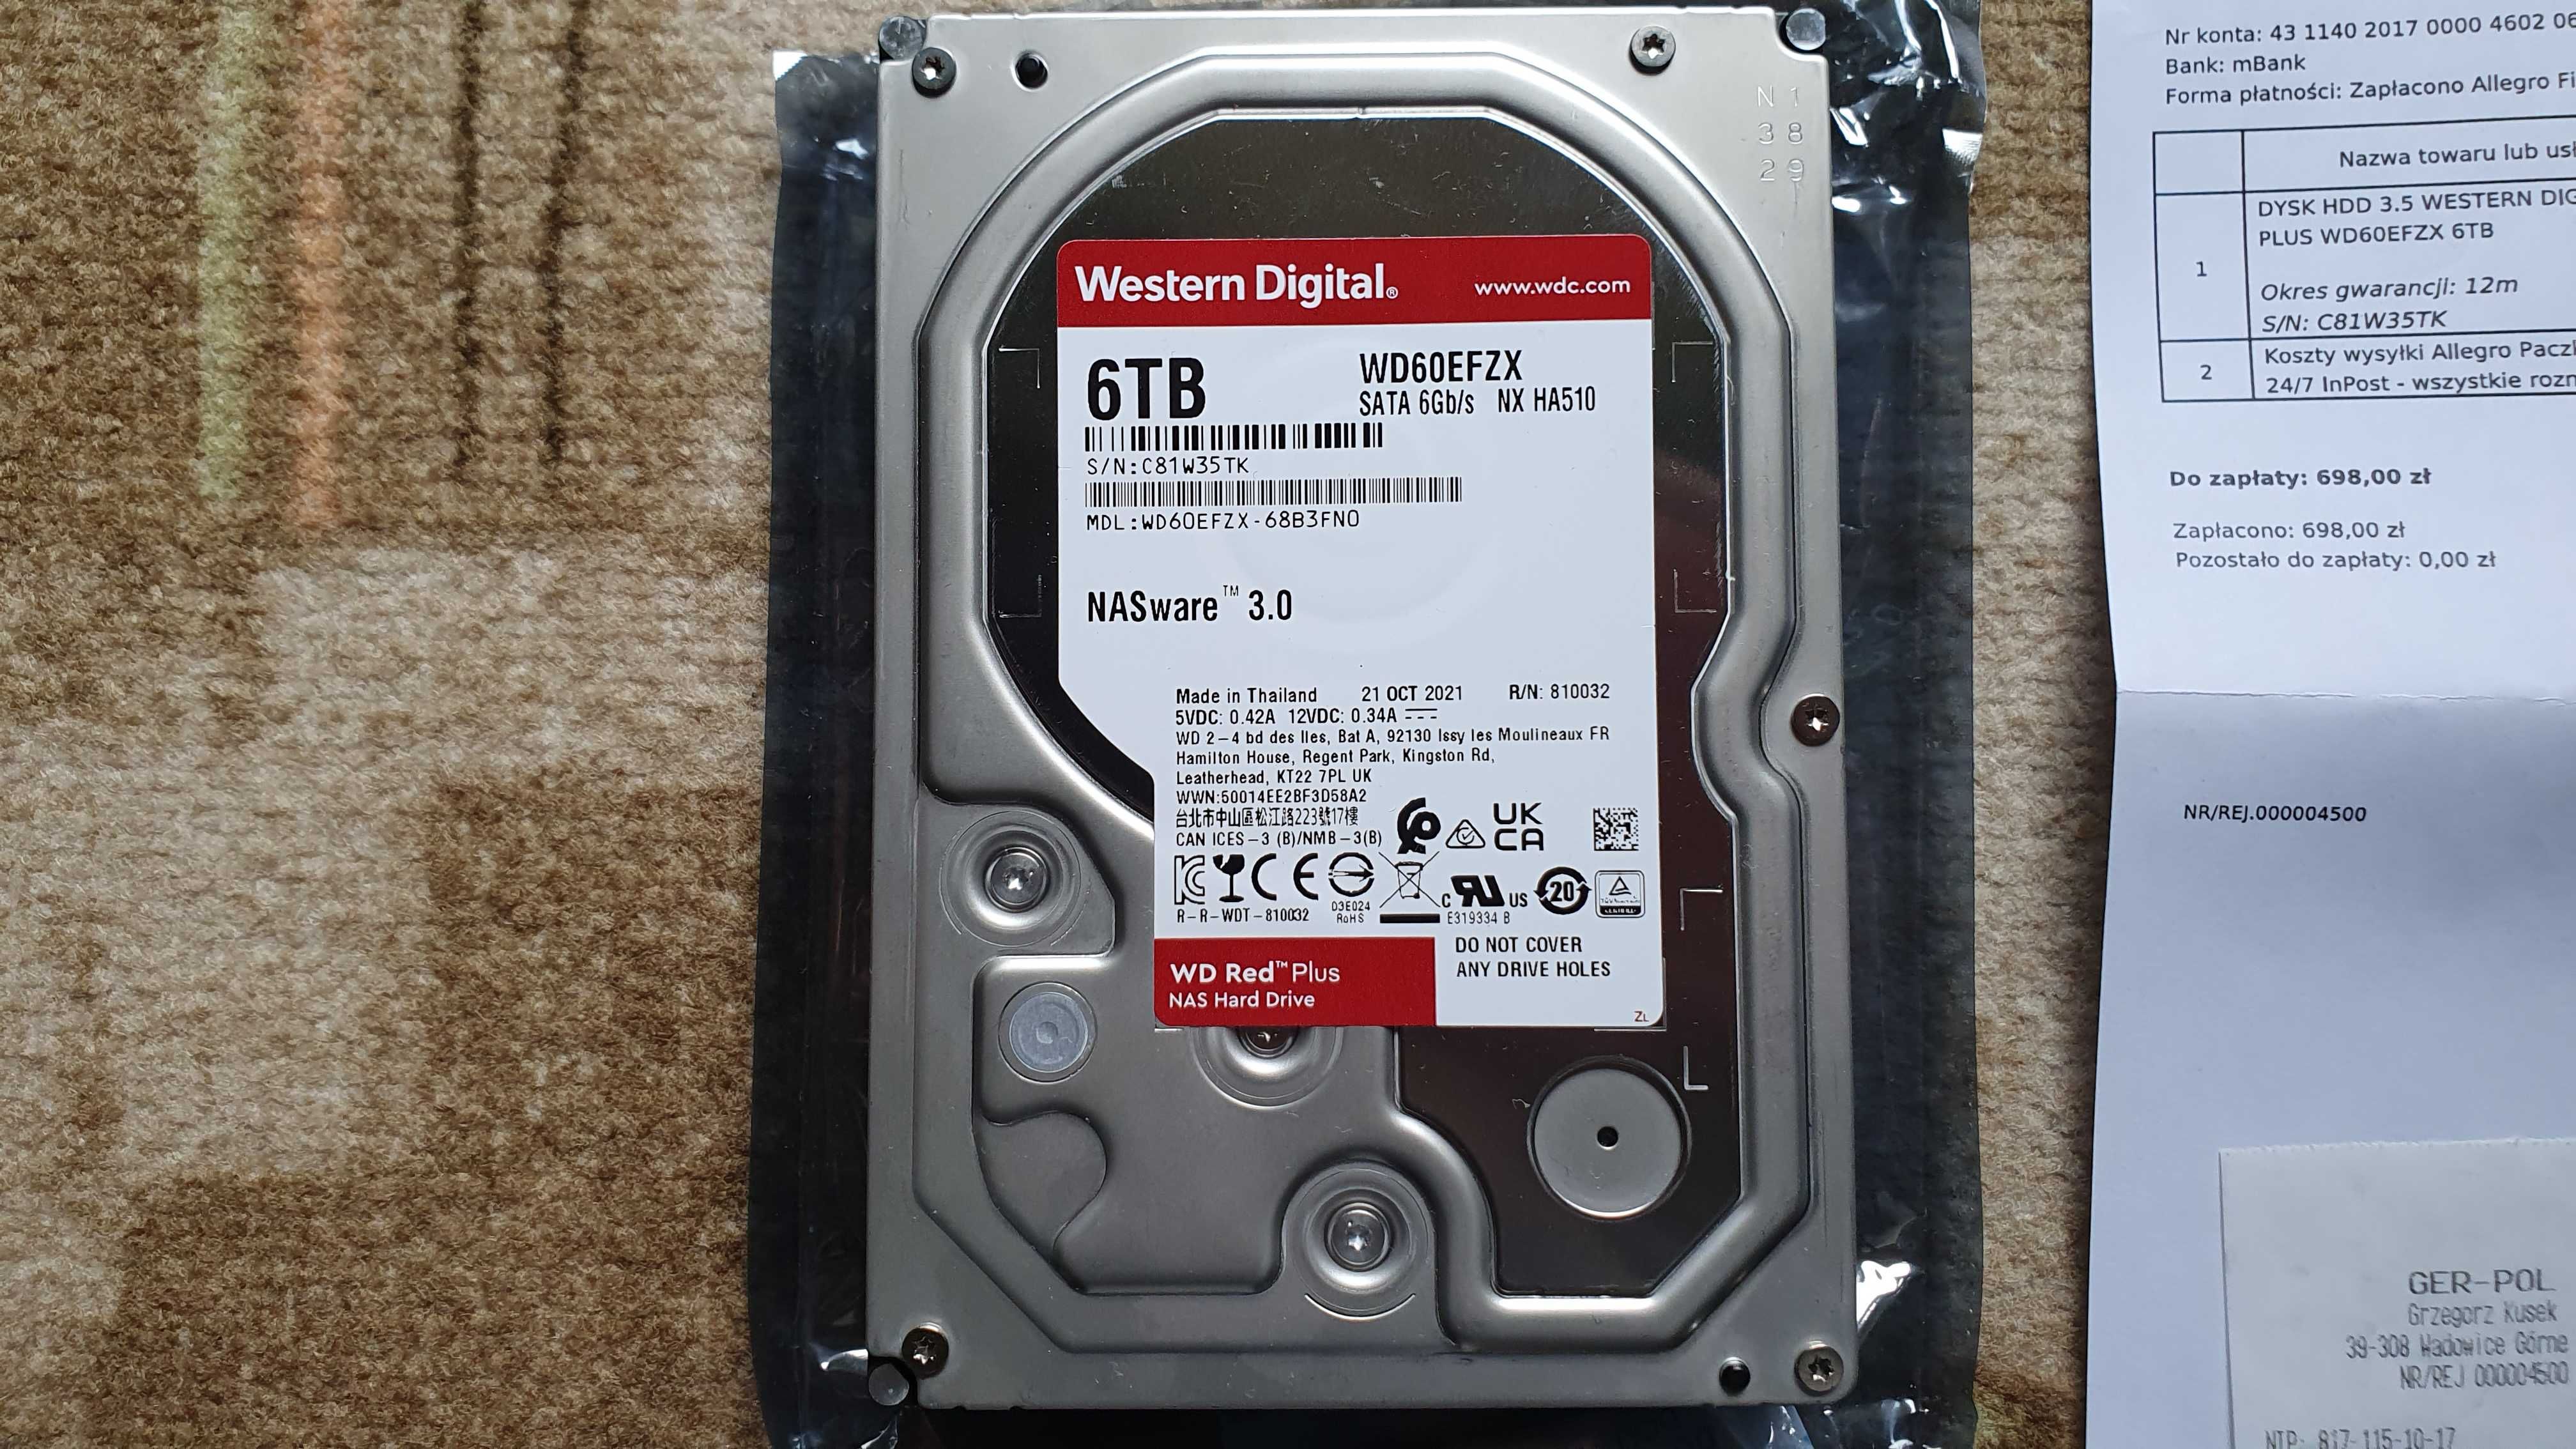 WD Red Plus 6TB Efzx Cmr Faktura / GW #1